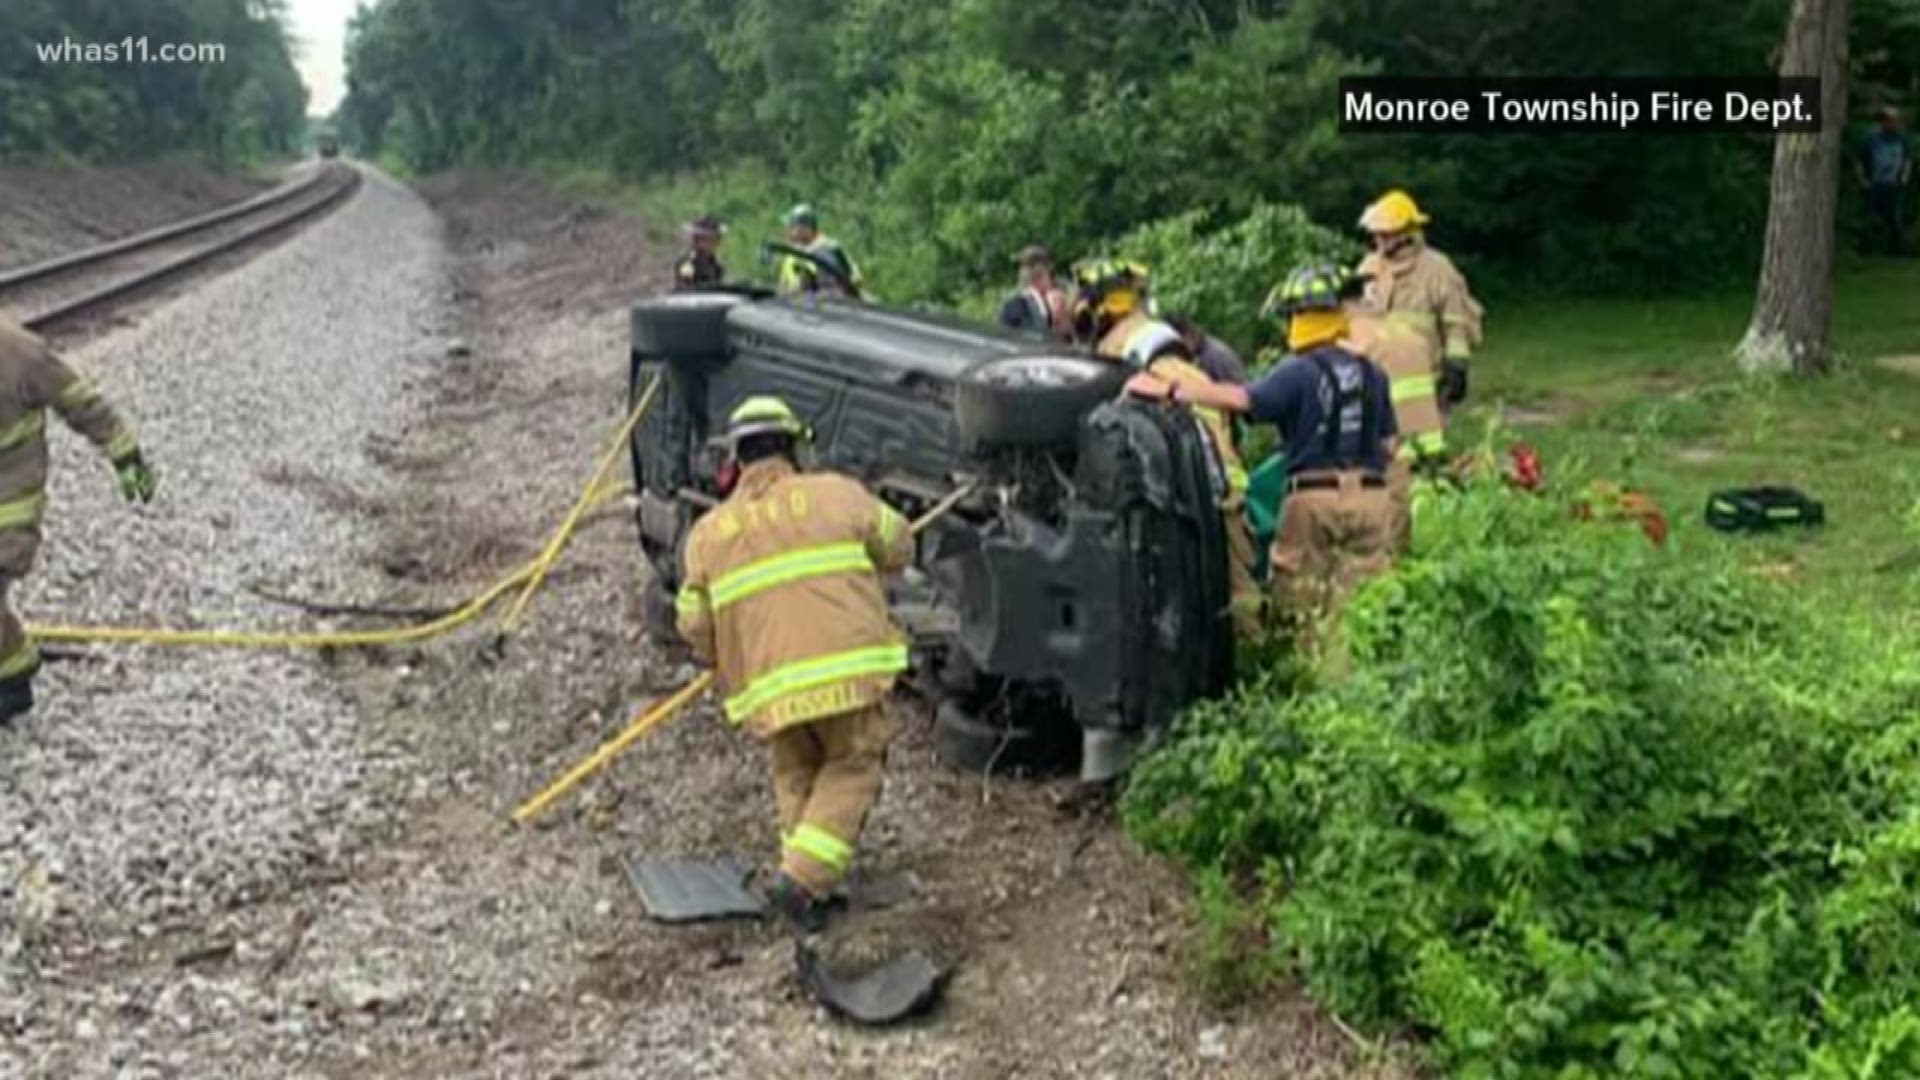 Two people were transported to University Hospital in Louisville after a car and train collided near Henryville.